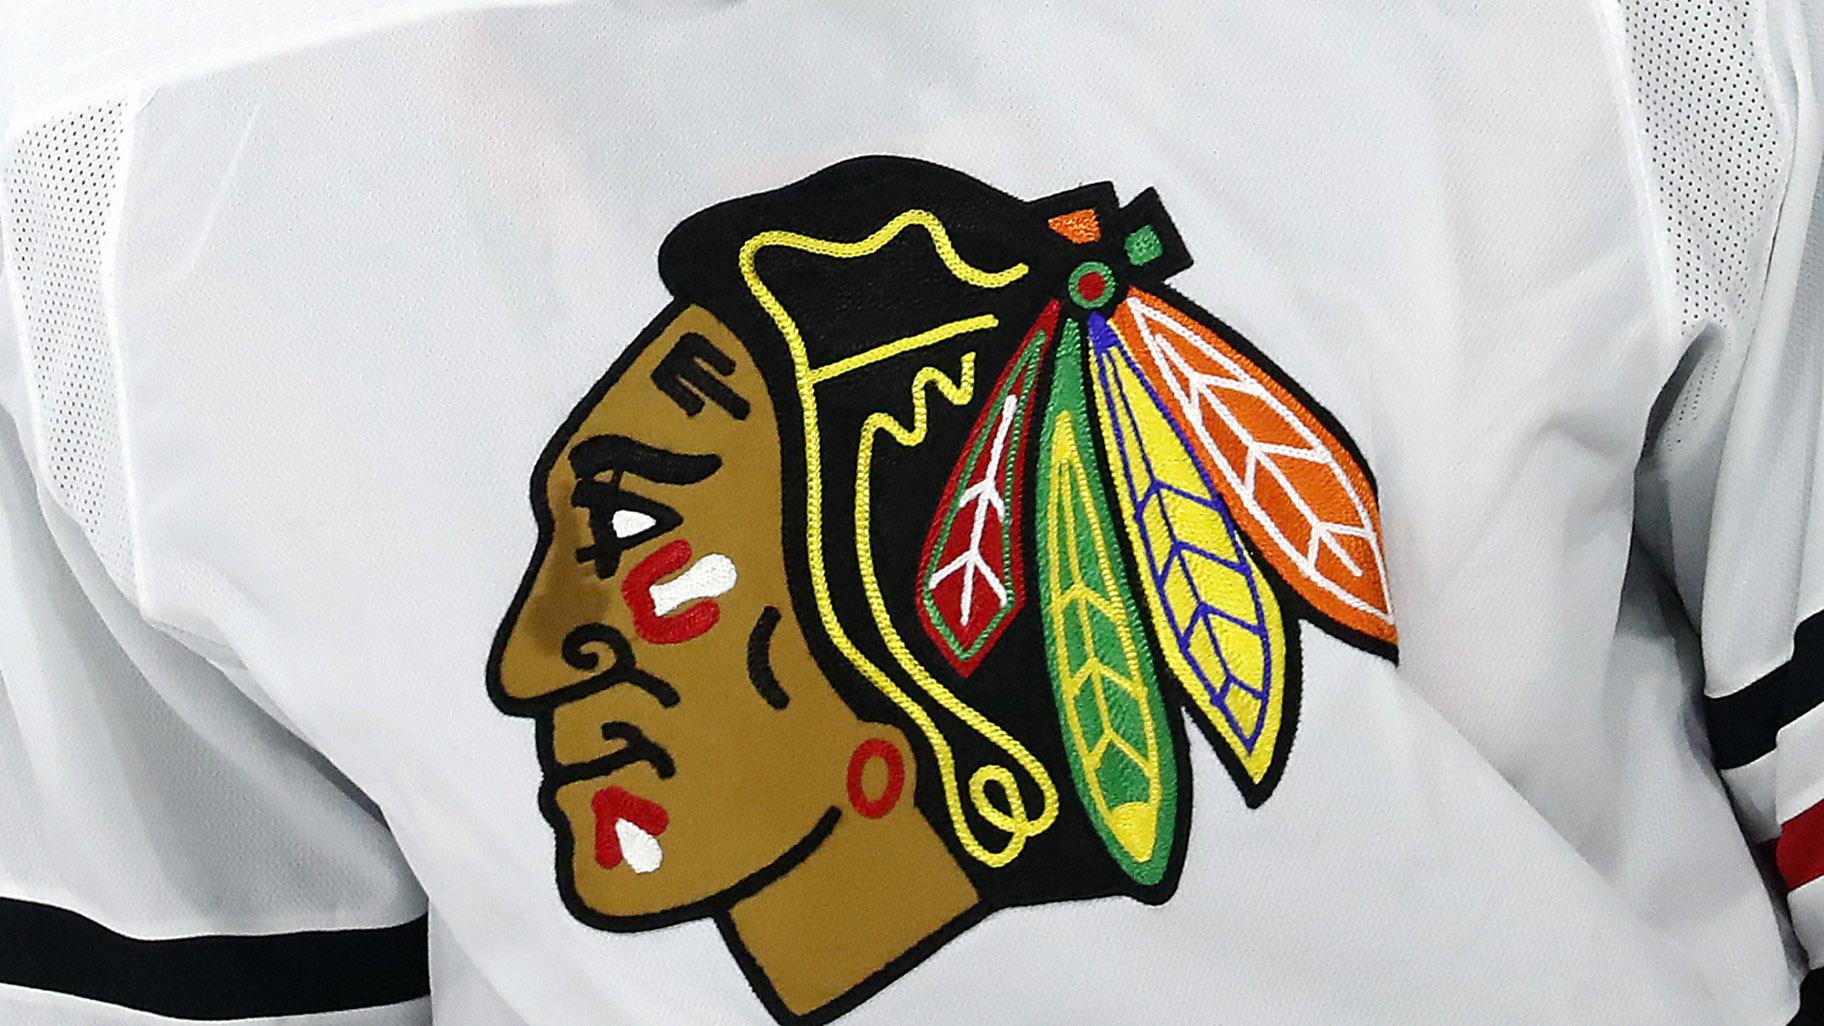 The Chicago Blackhawks logo is shown on a jersey in Raleigh, N.C., in this May 3, 2021, file photo. (AP Photo / Karl B DeBlaker, File)